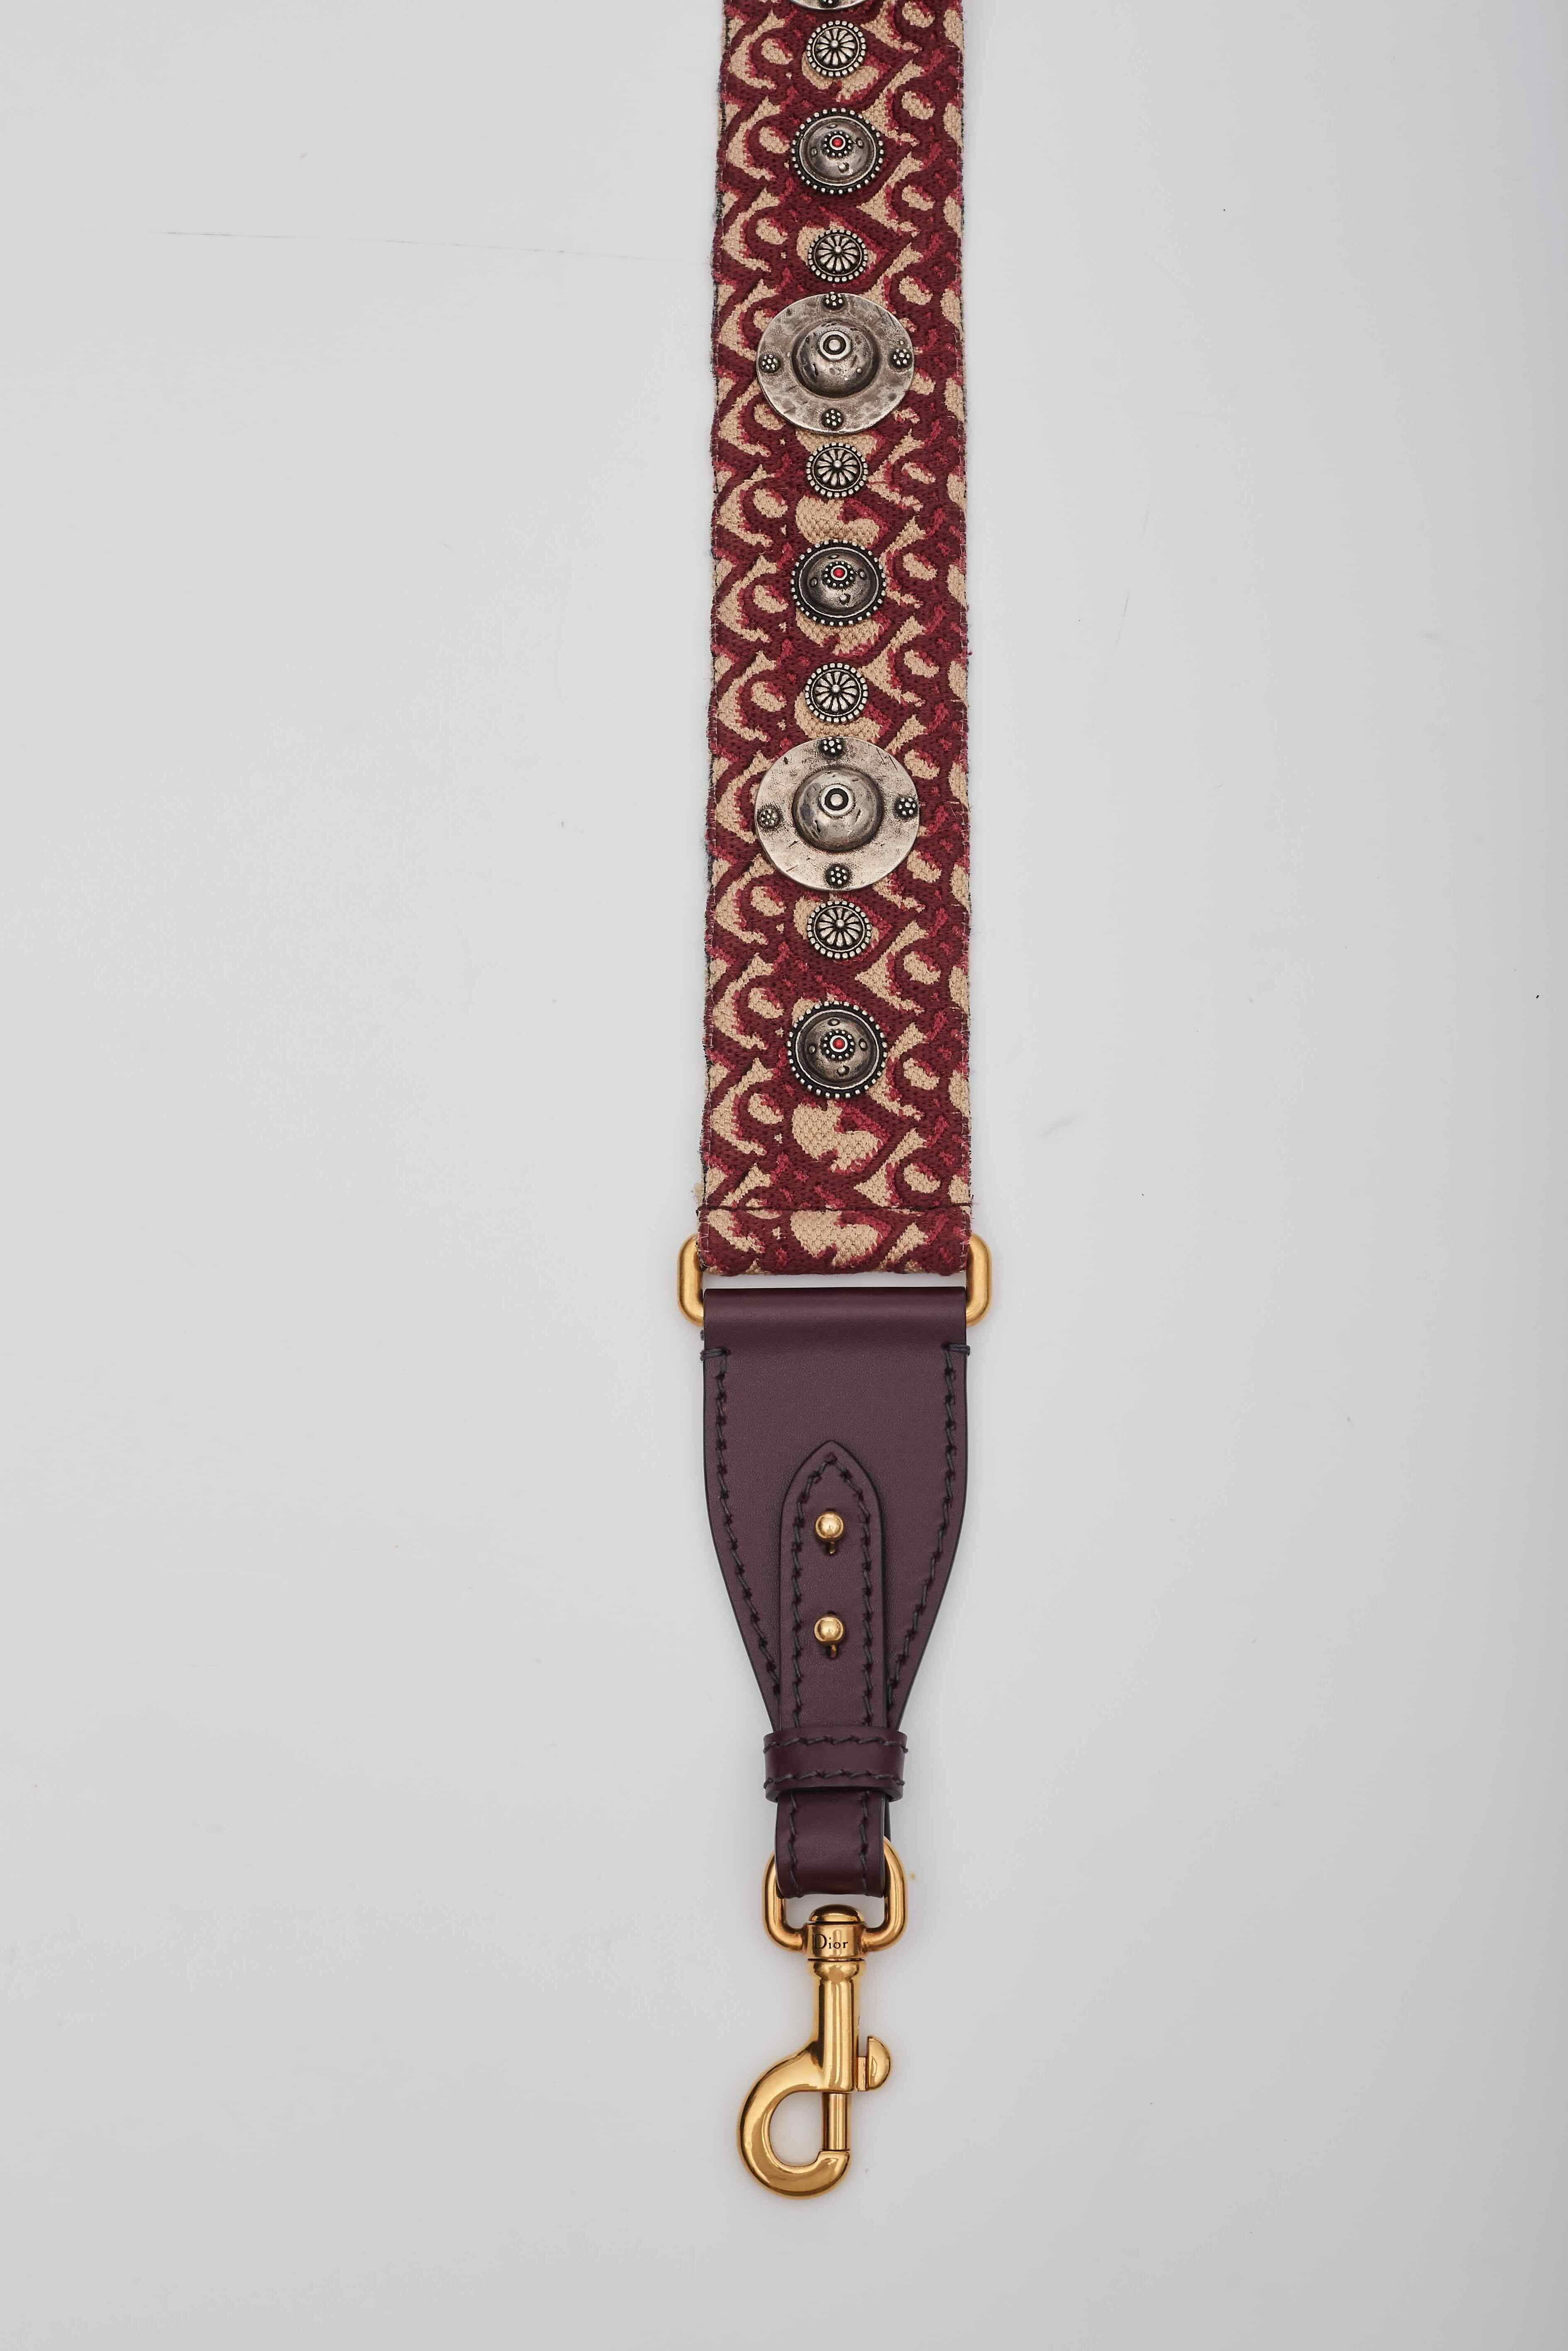 Bohemian studded burgundy and beige cloth shoulder strap .
Condition is very good with faint scratches.

Made in France